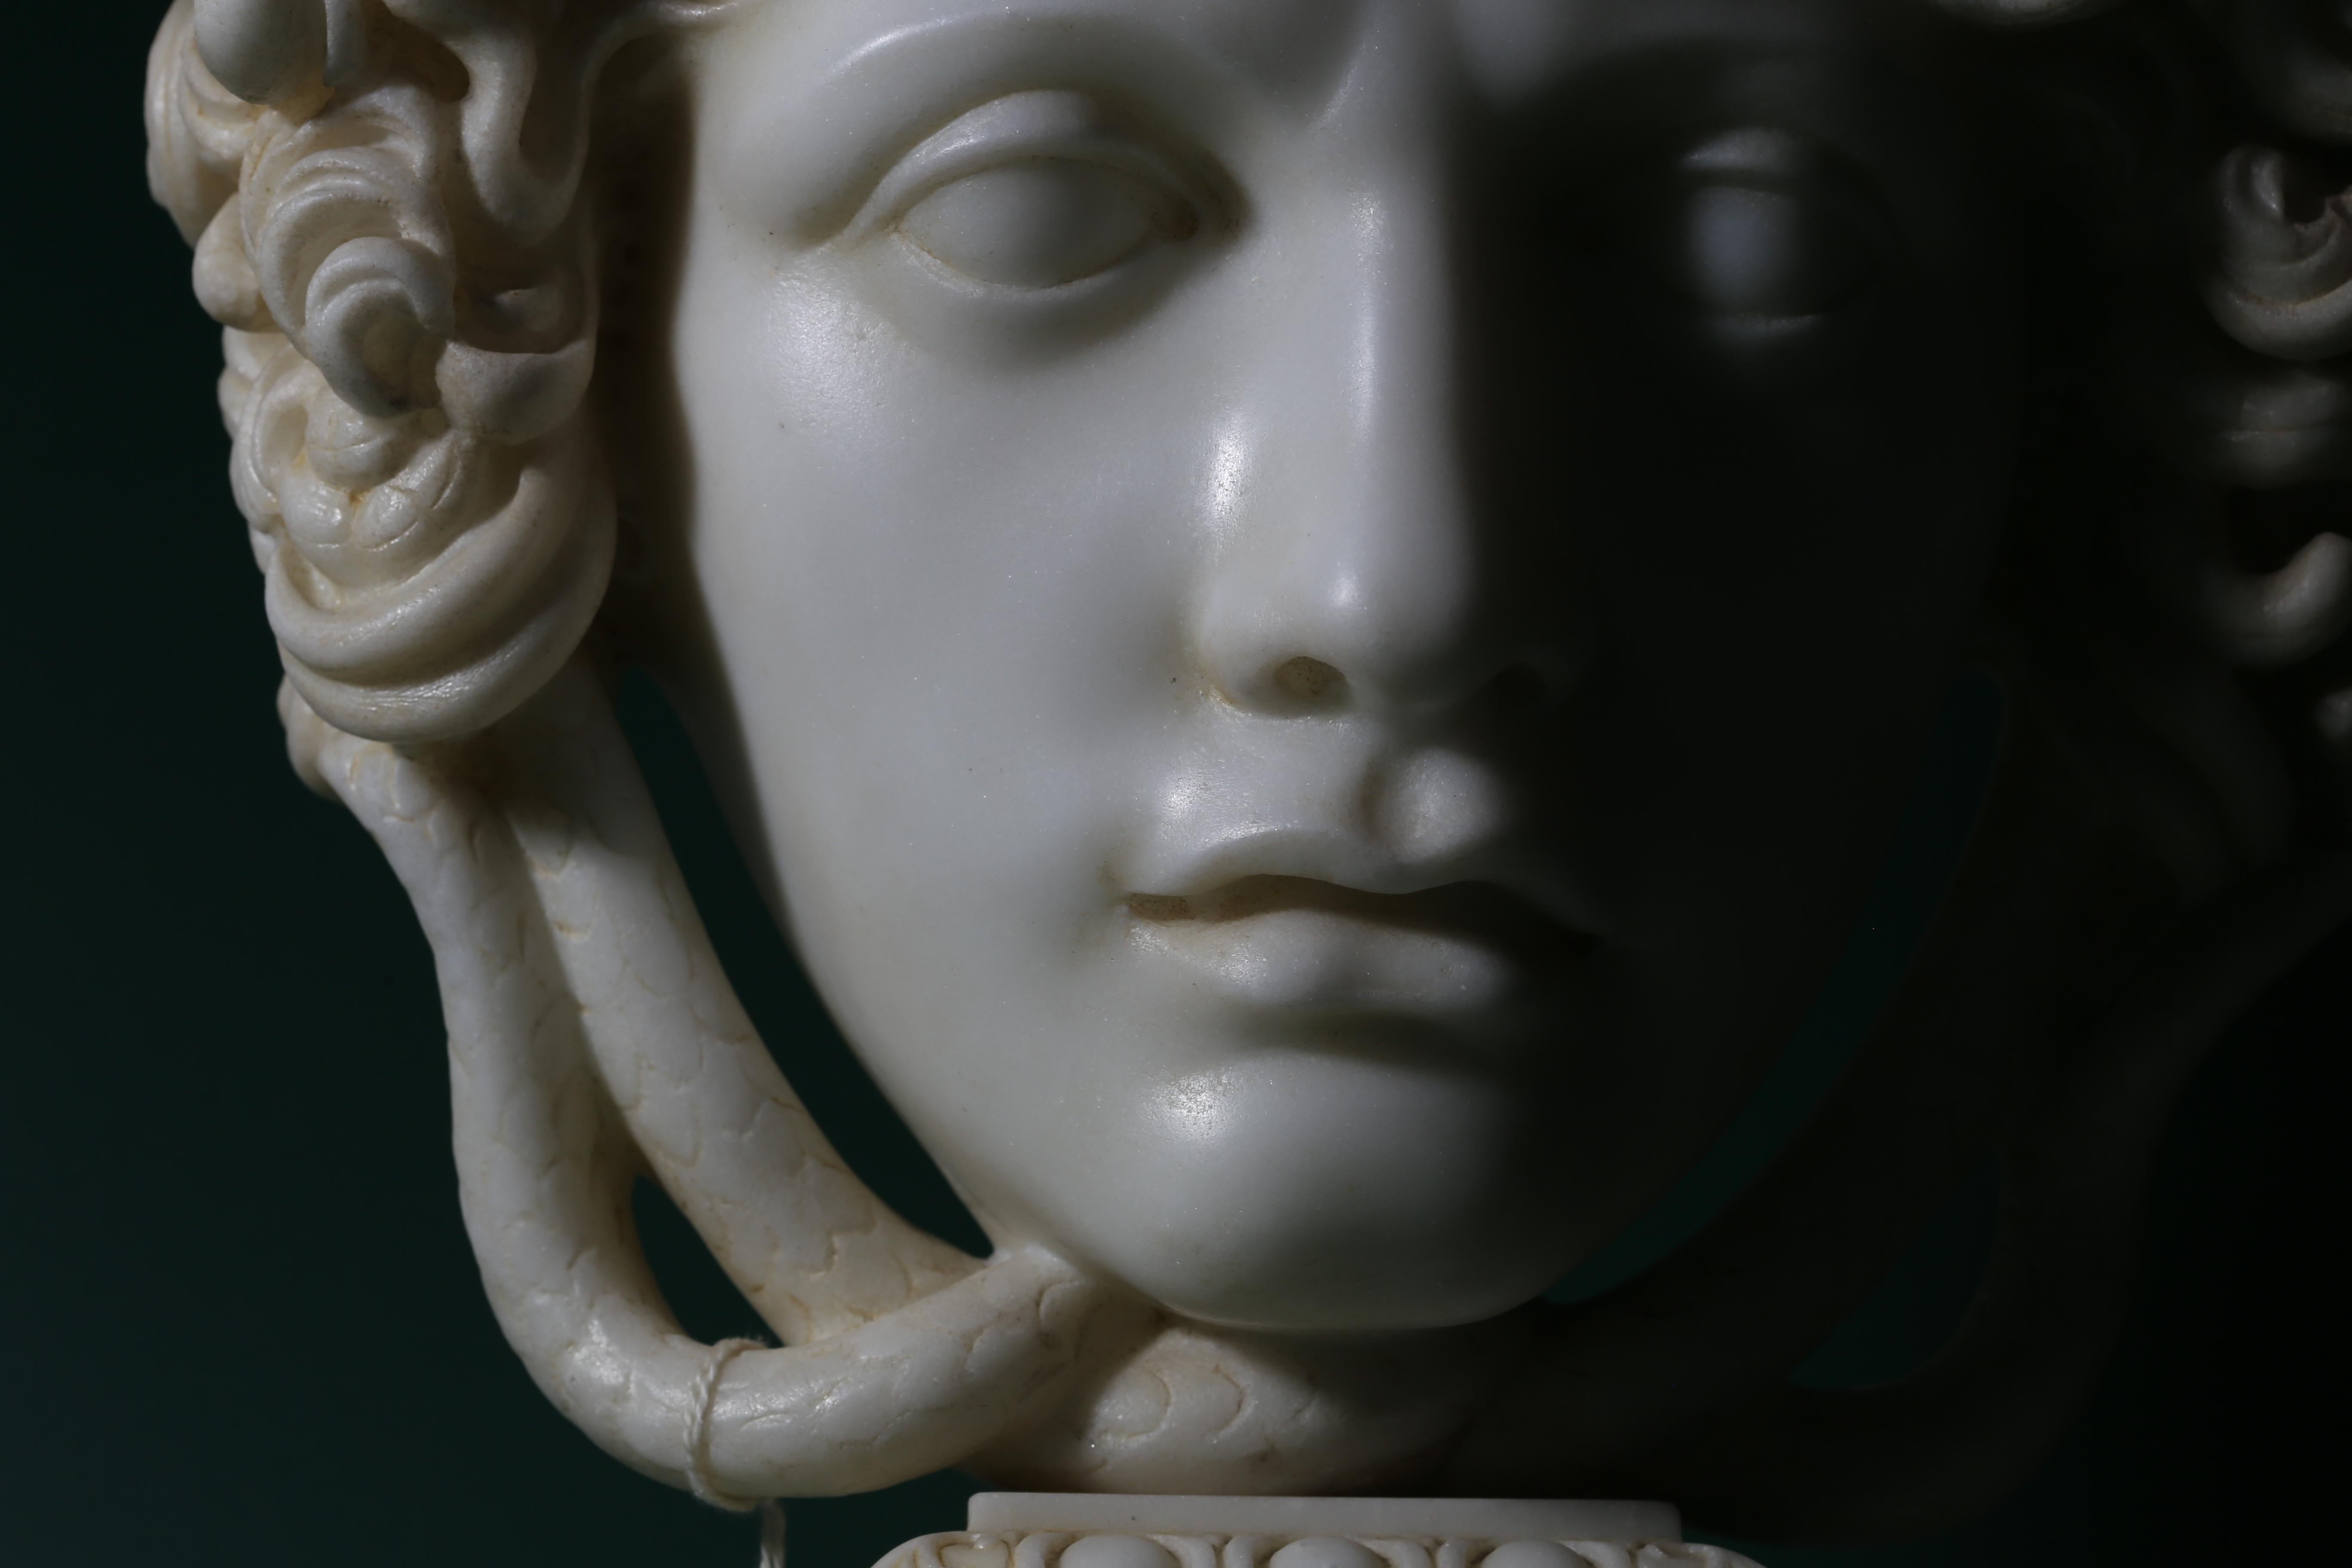 Carrara Marble Early 19th Century Relief of the Medusa Rondanini, Sotheby's 2011 London Auction For Sale